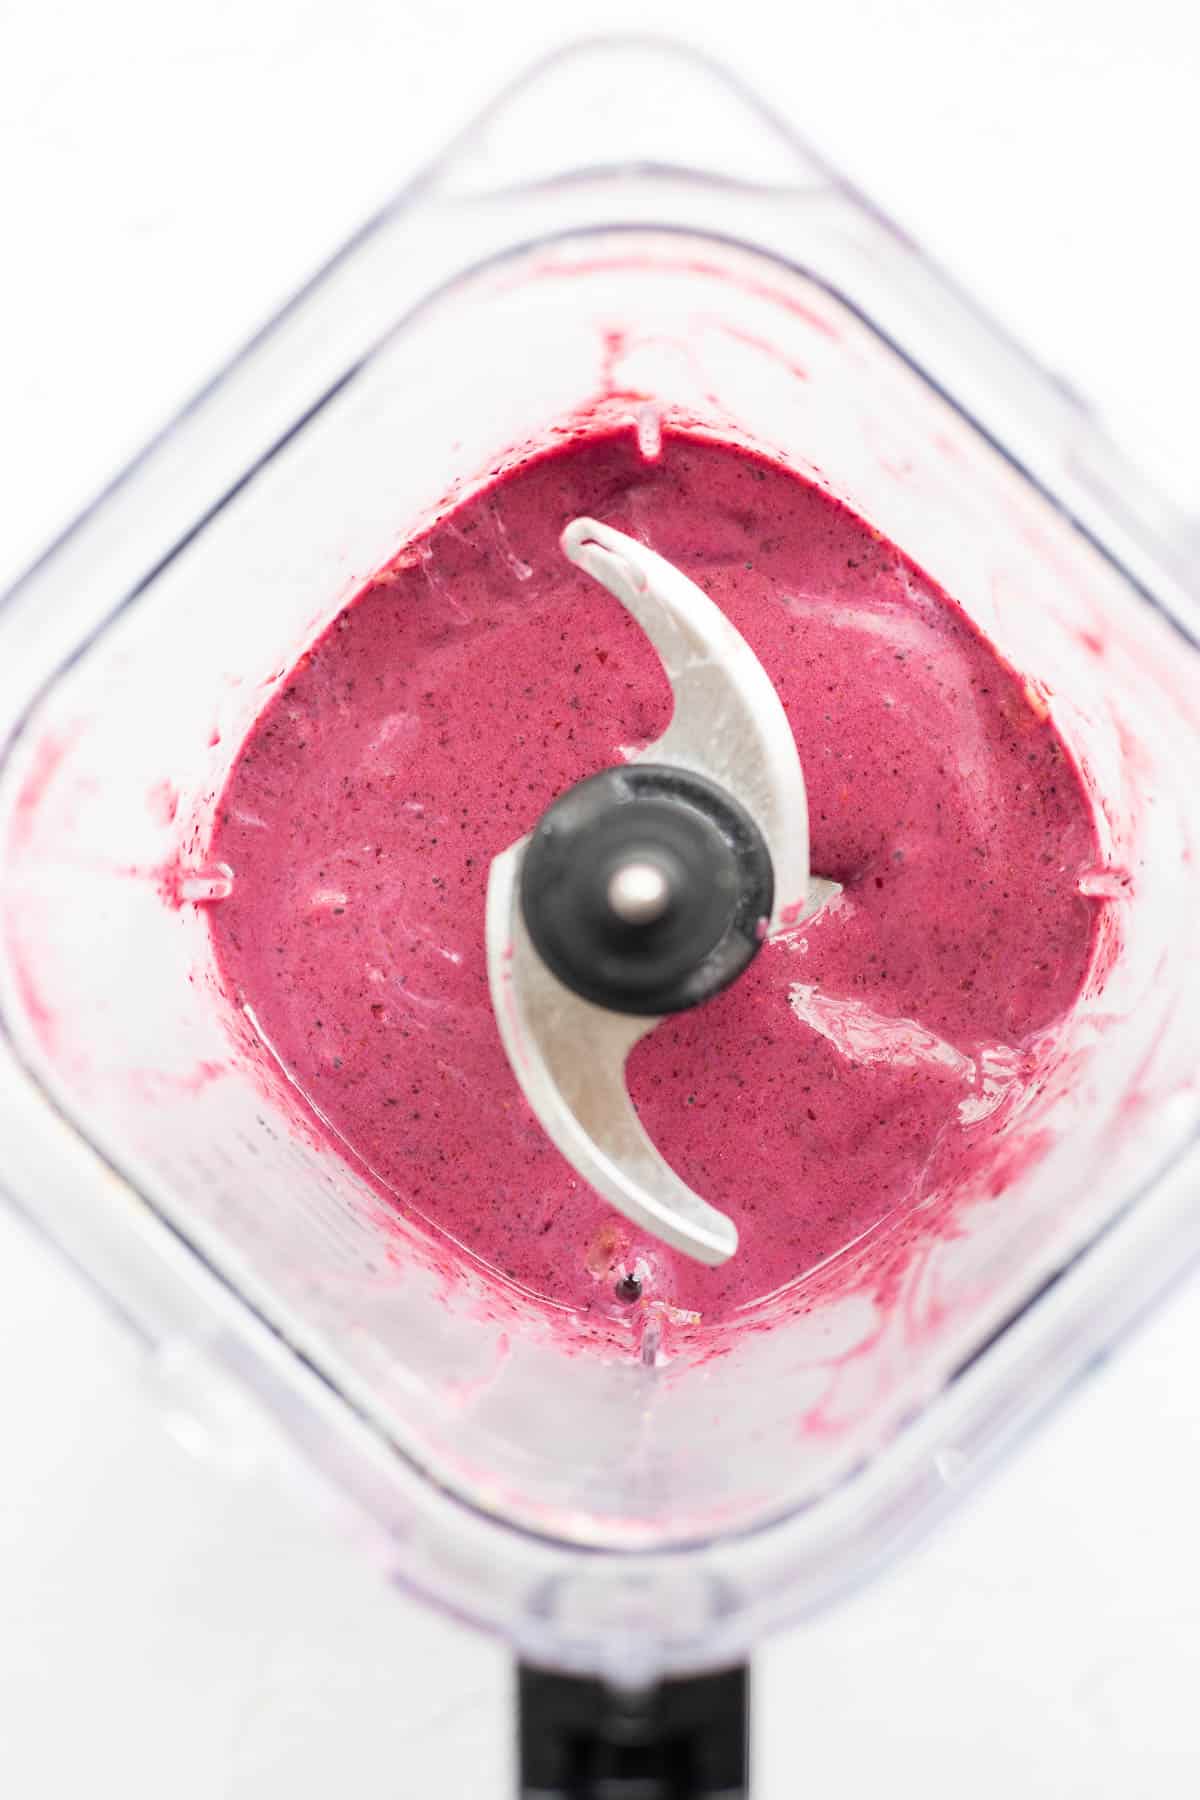 mixed berry yogurt smoothie in a blender.